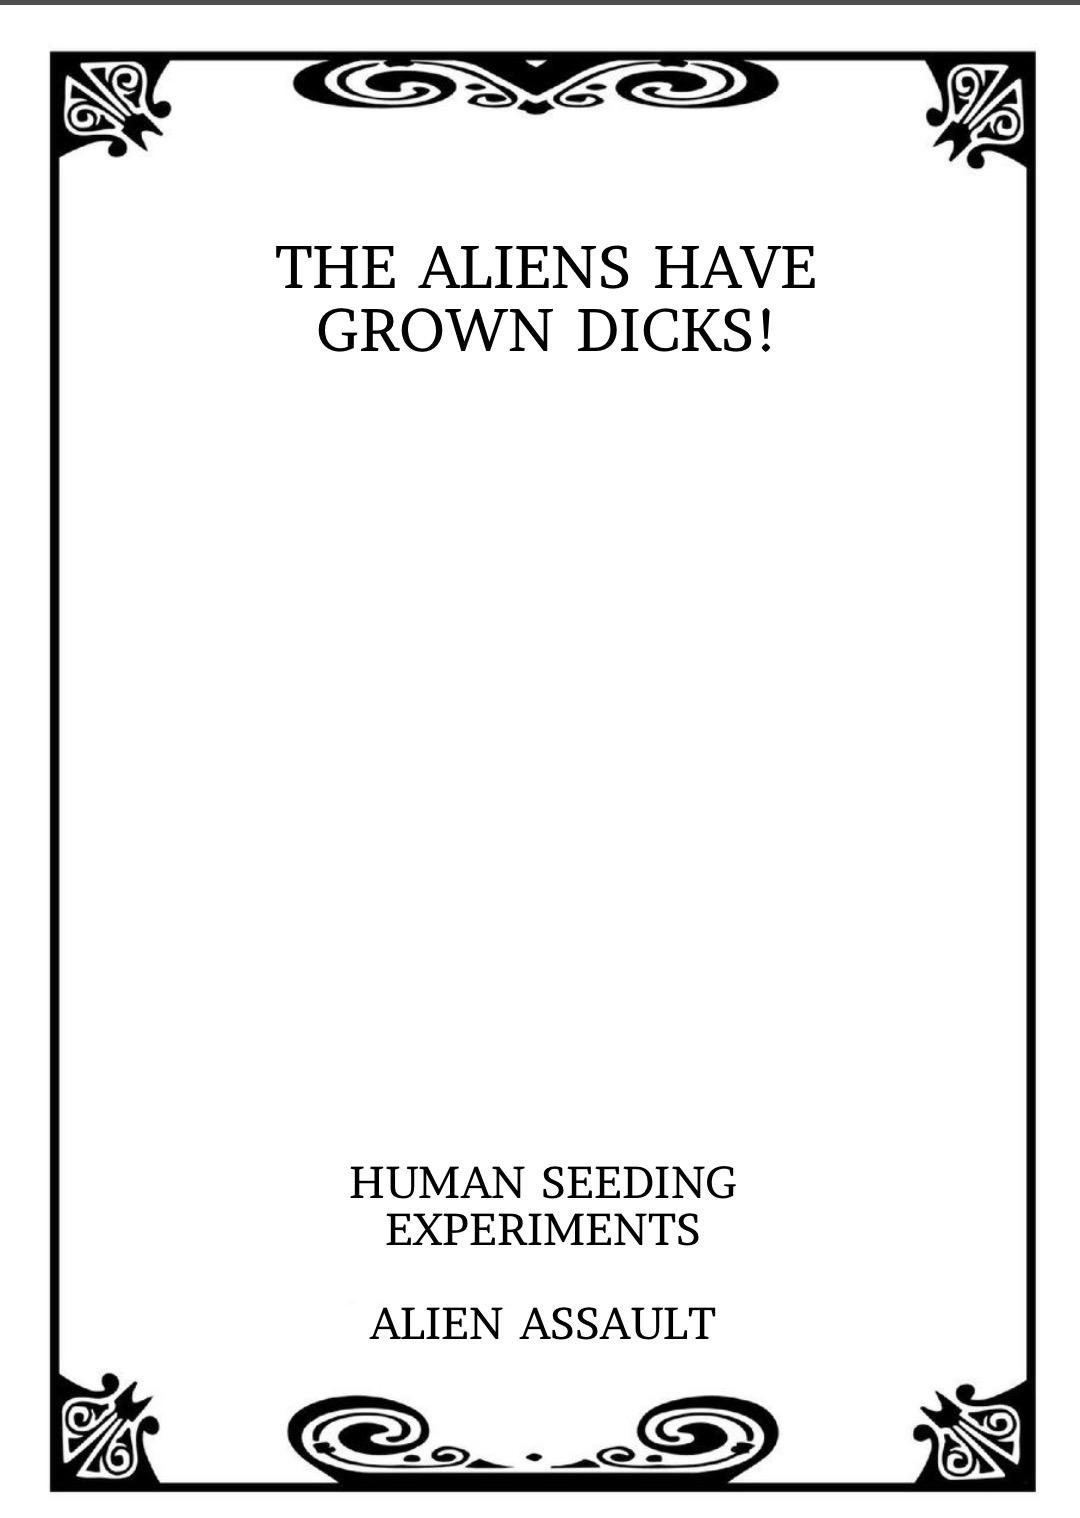 Maduro Alien Seeding Experiments 1 Crazy - Picture 2